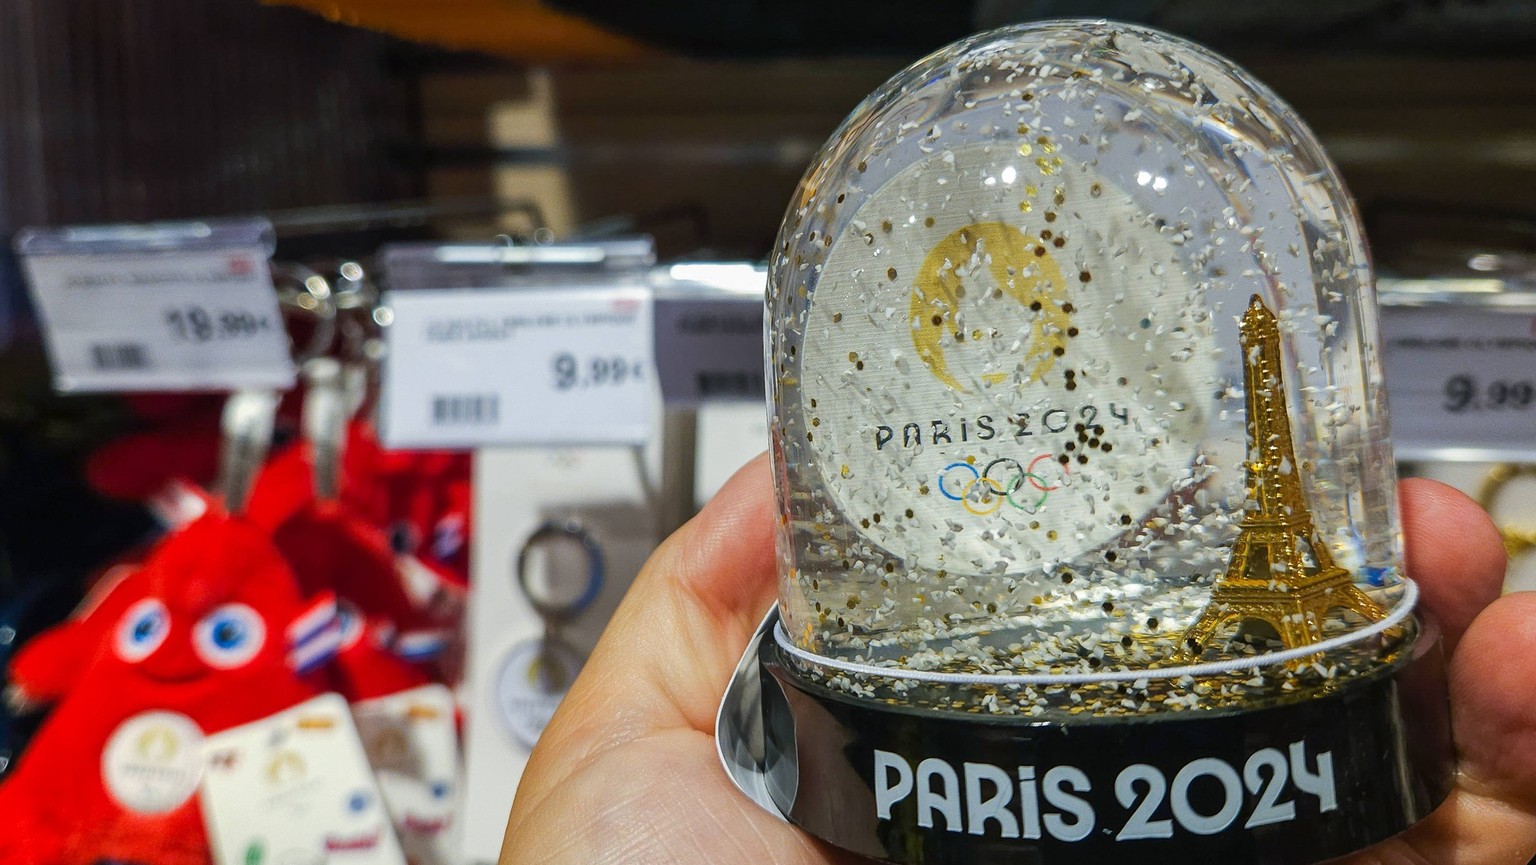 Paris Charles De Gaulle Airport ROISSY-EN-FRANCE, FRANCE - AUGUST.14, 2023: Paris Olympics 2024 accessories, gifts and merchandise on display in a shop at Paris Charles de Gaulle Airport, on August 14 ...